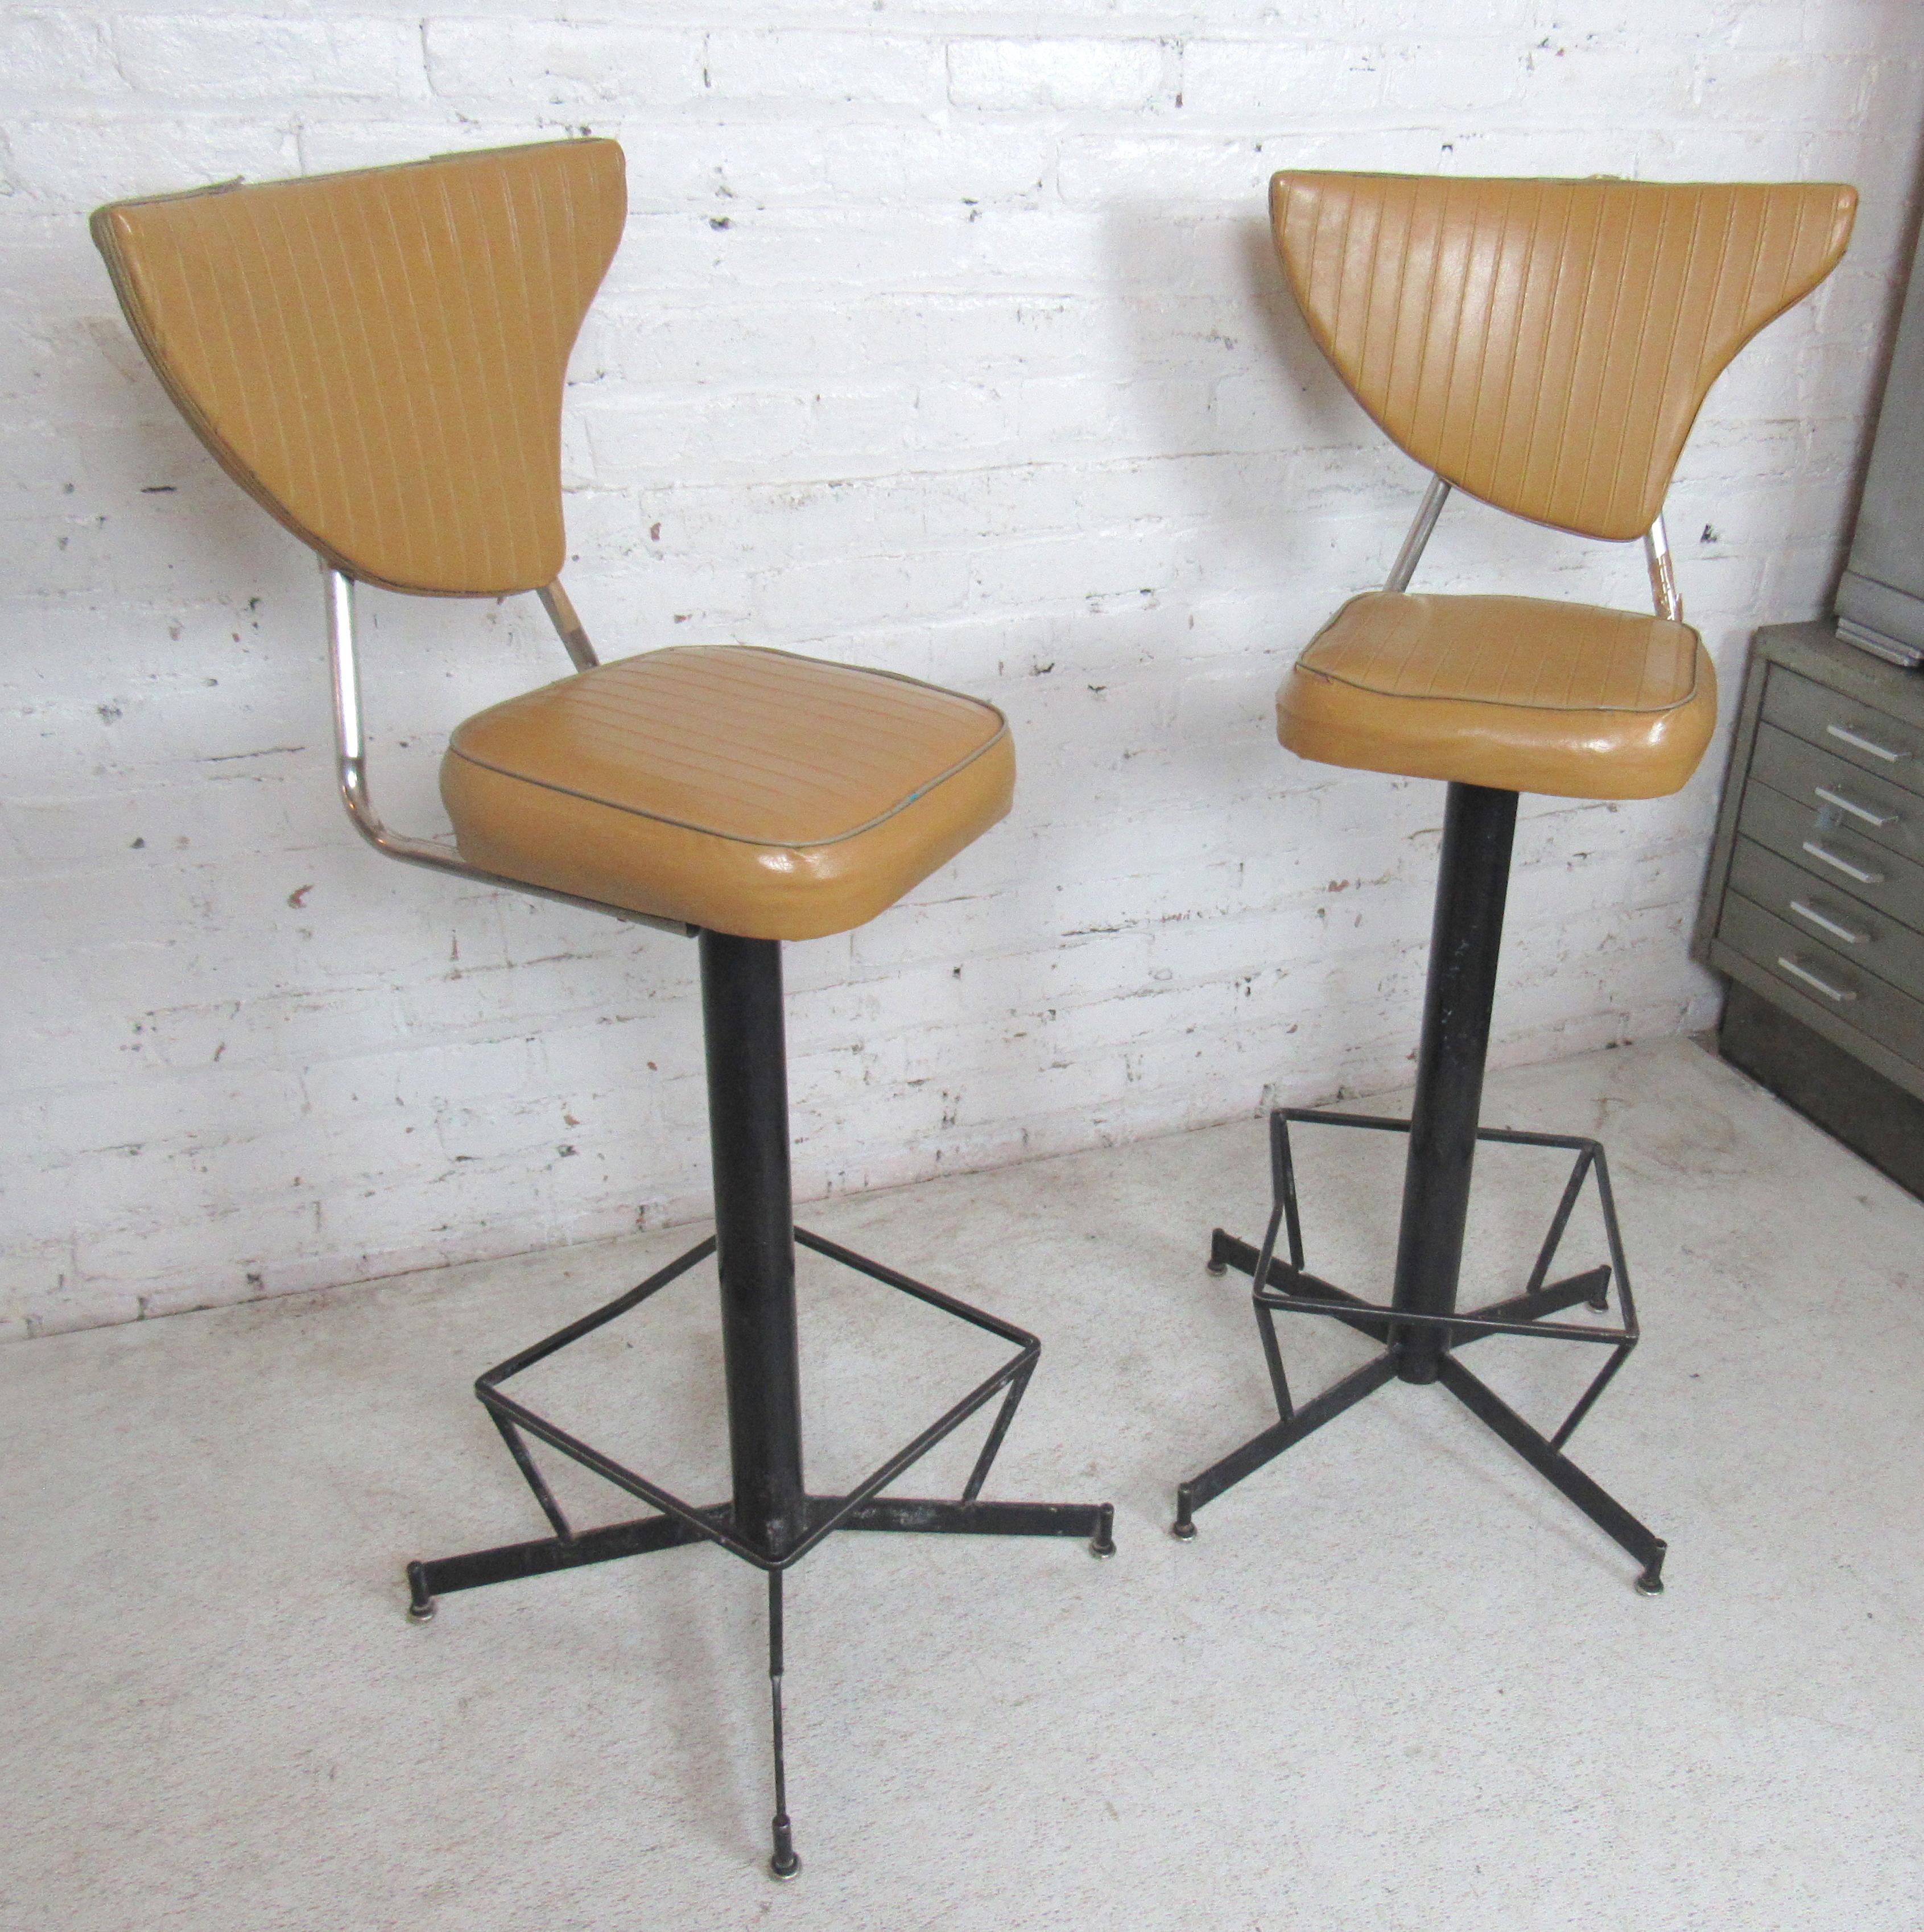 Iron frame stools with unusual backs and metal footrests.
(Please confirm item location - NY or NJ - with dealer).
   